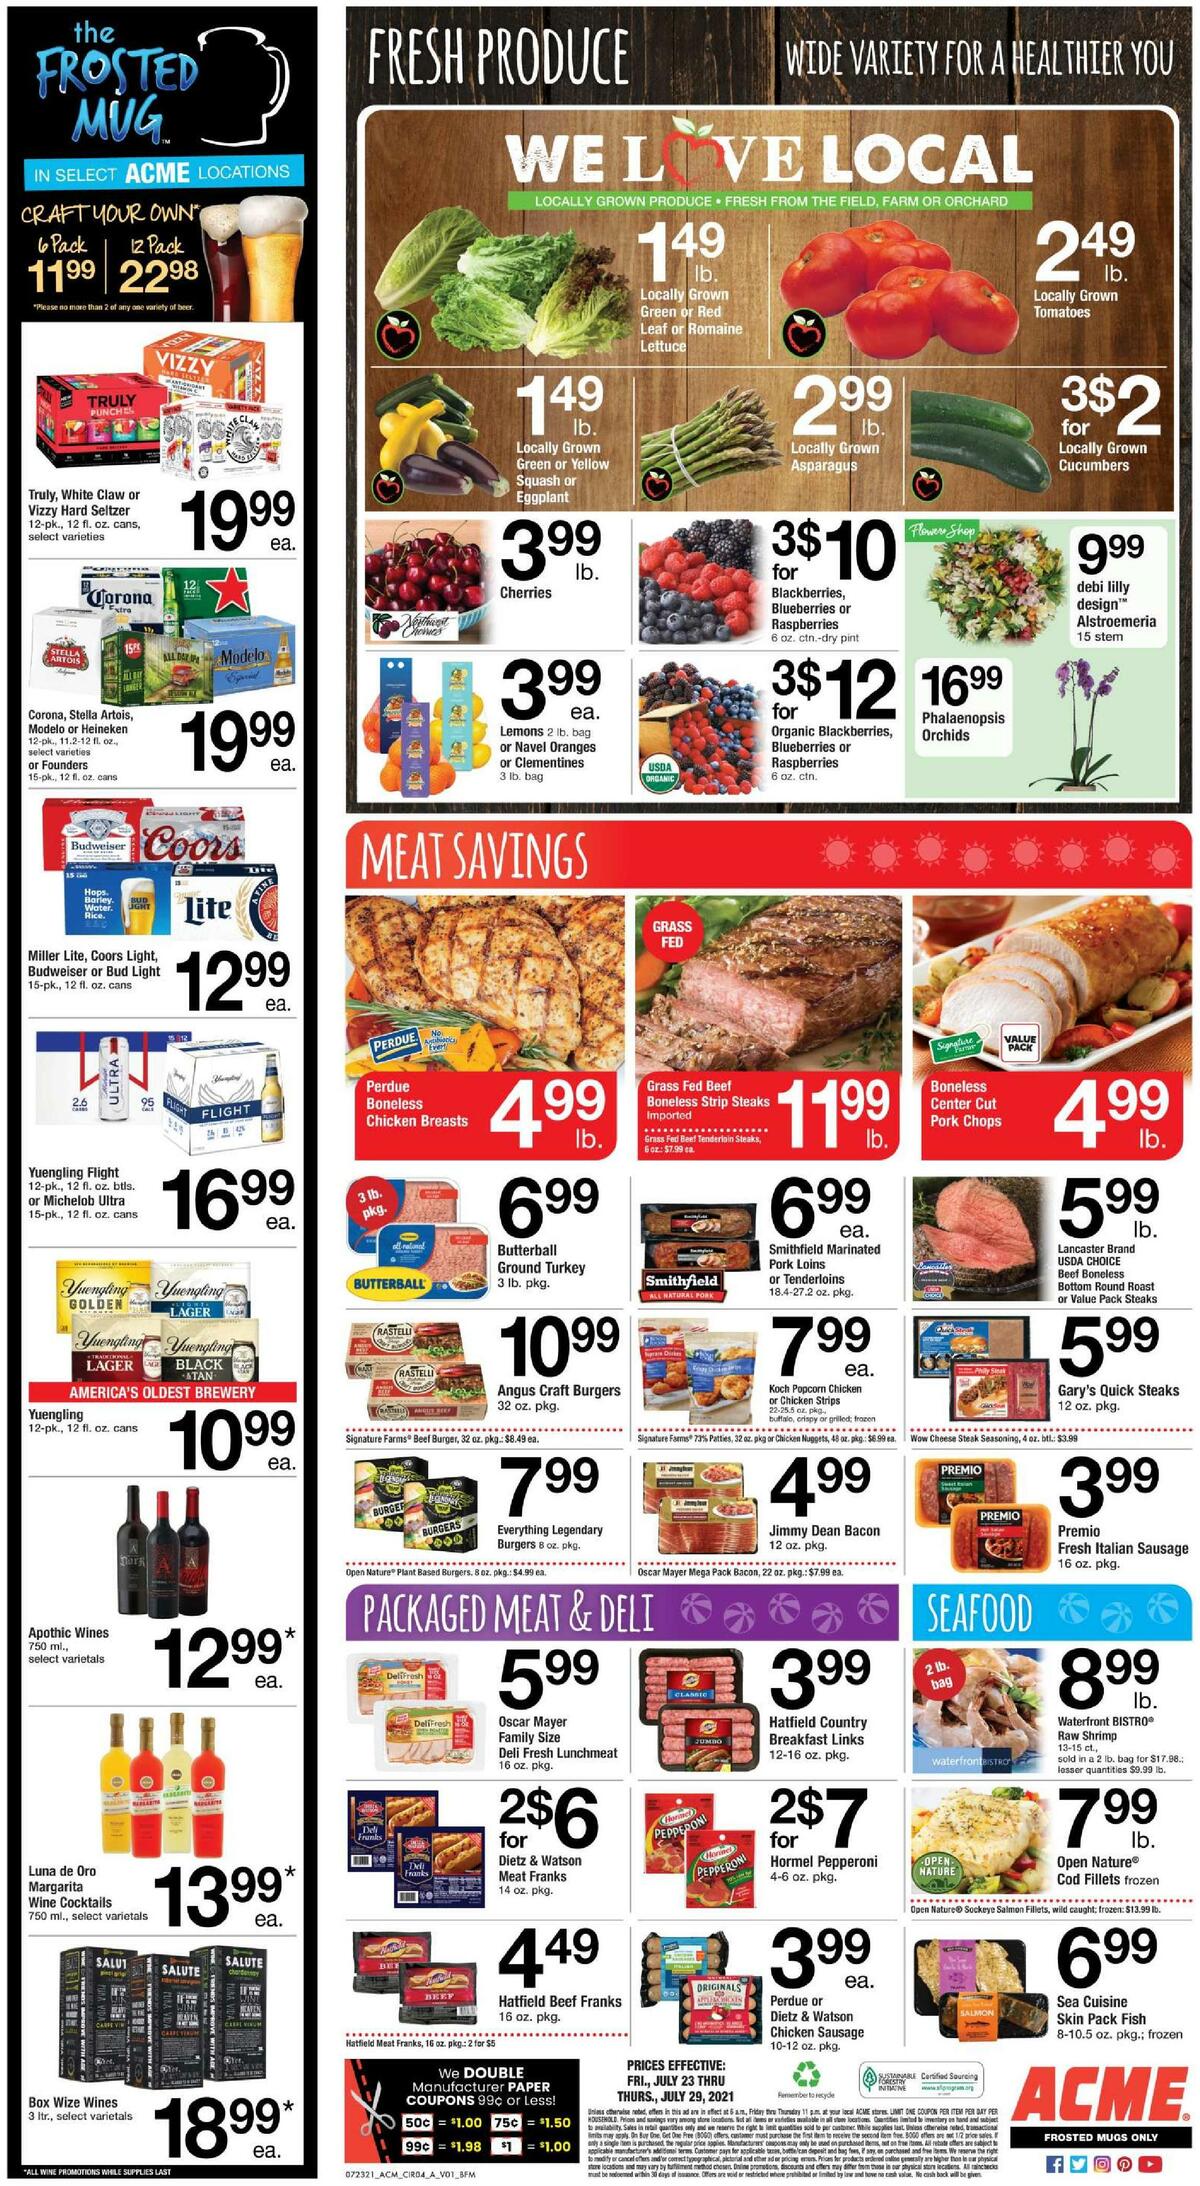 ACME Markets Weekly Ad from July 23